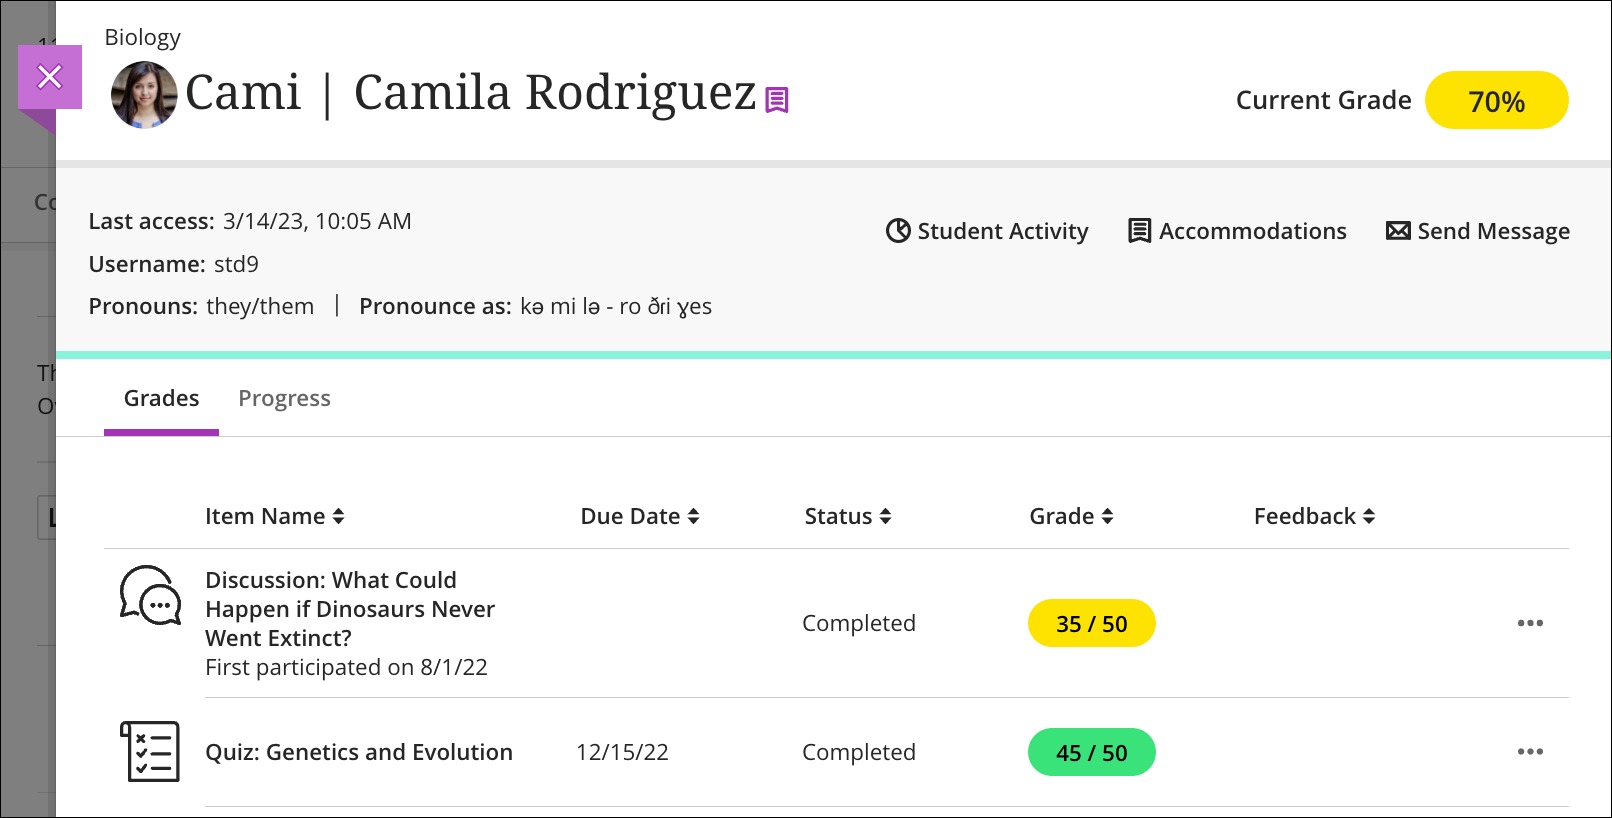 Image of the Student Overview Page, showing additional student information and a tab for Grades and Progress